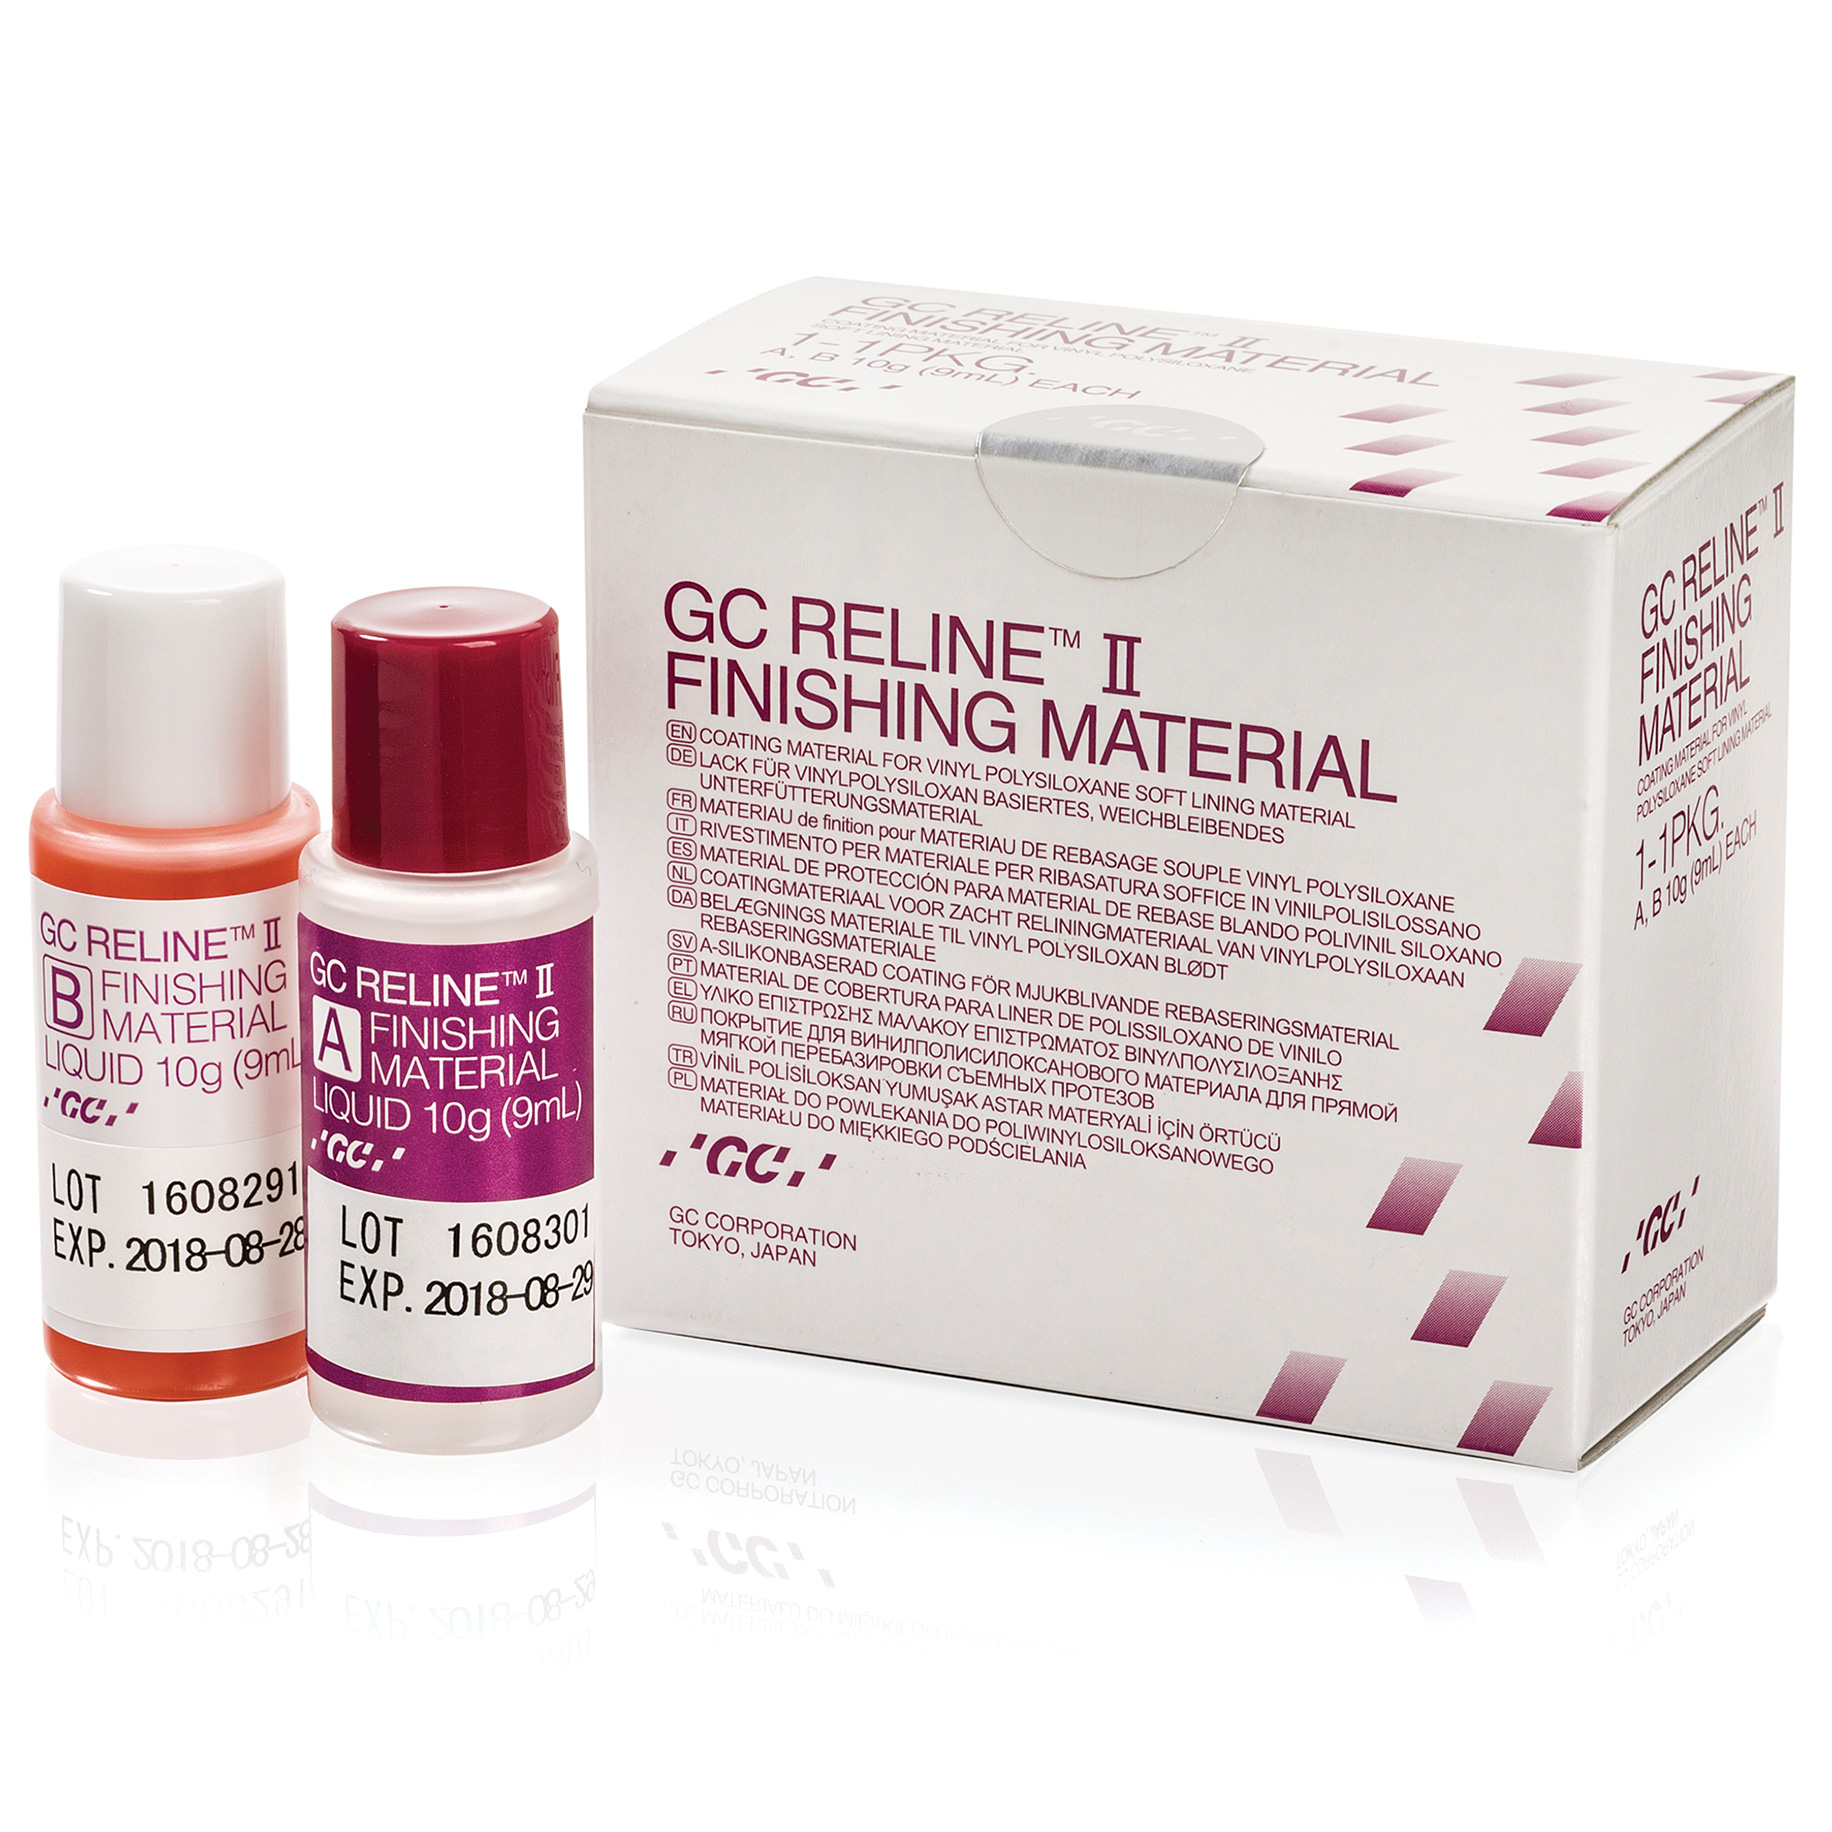 GC Reline II Soft Finishing Material (Modifier) 1:1 Pack 